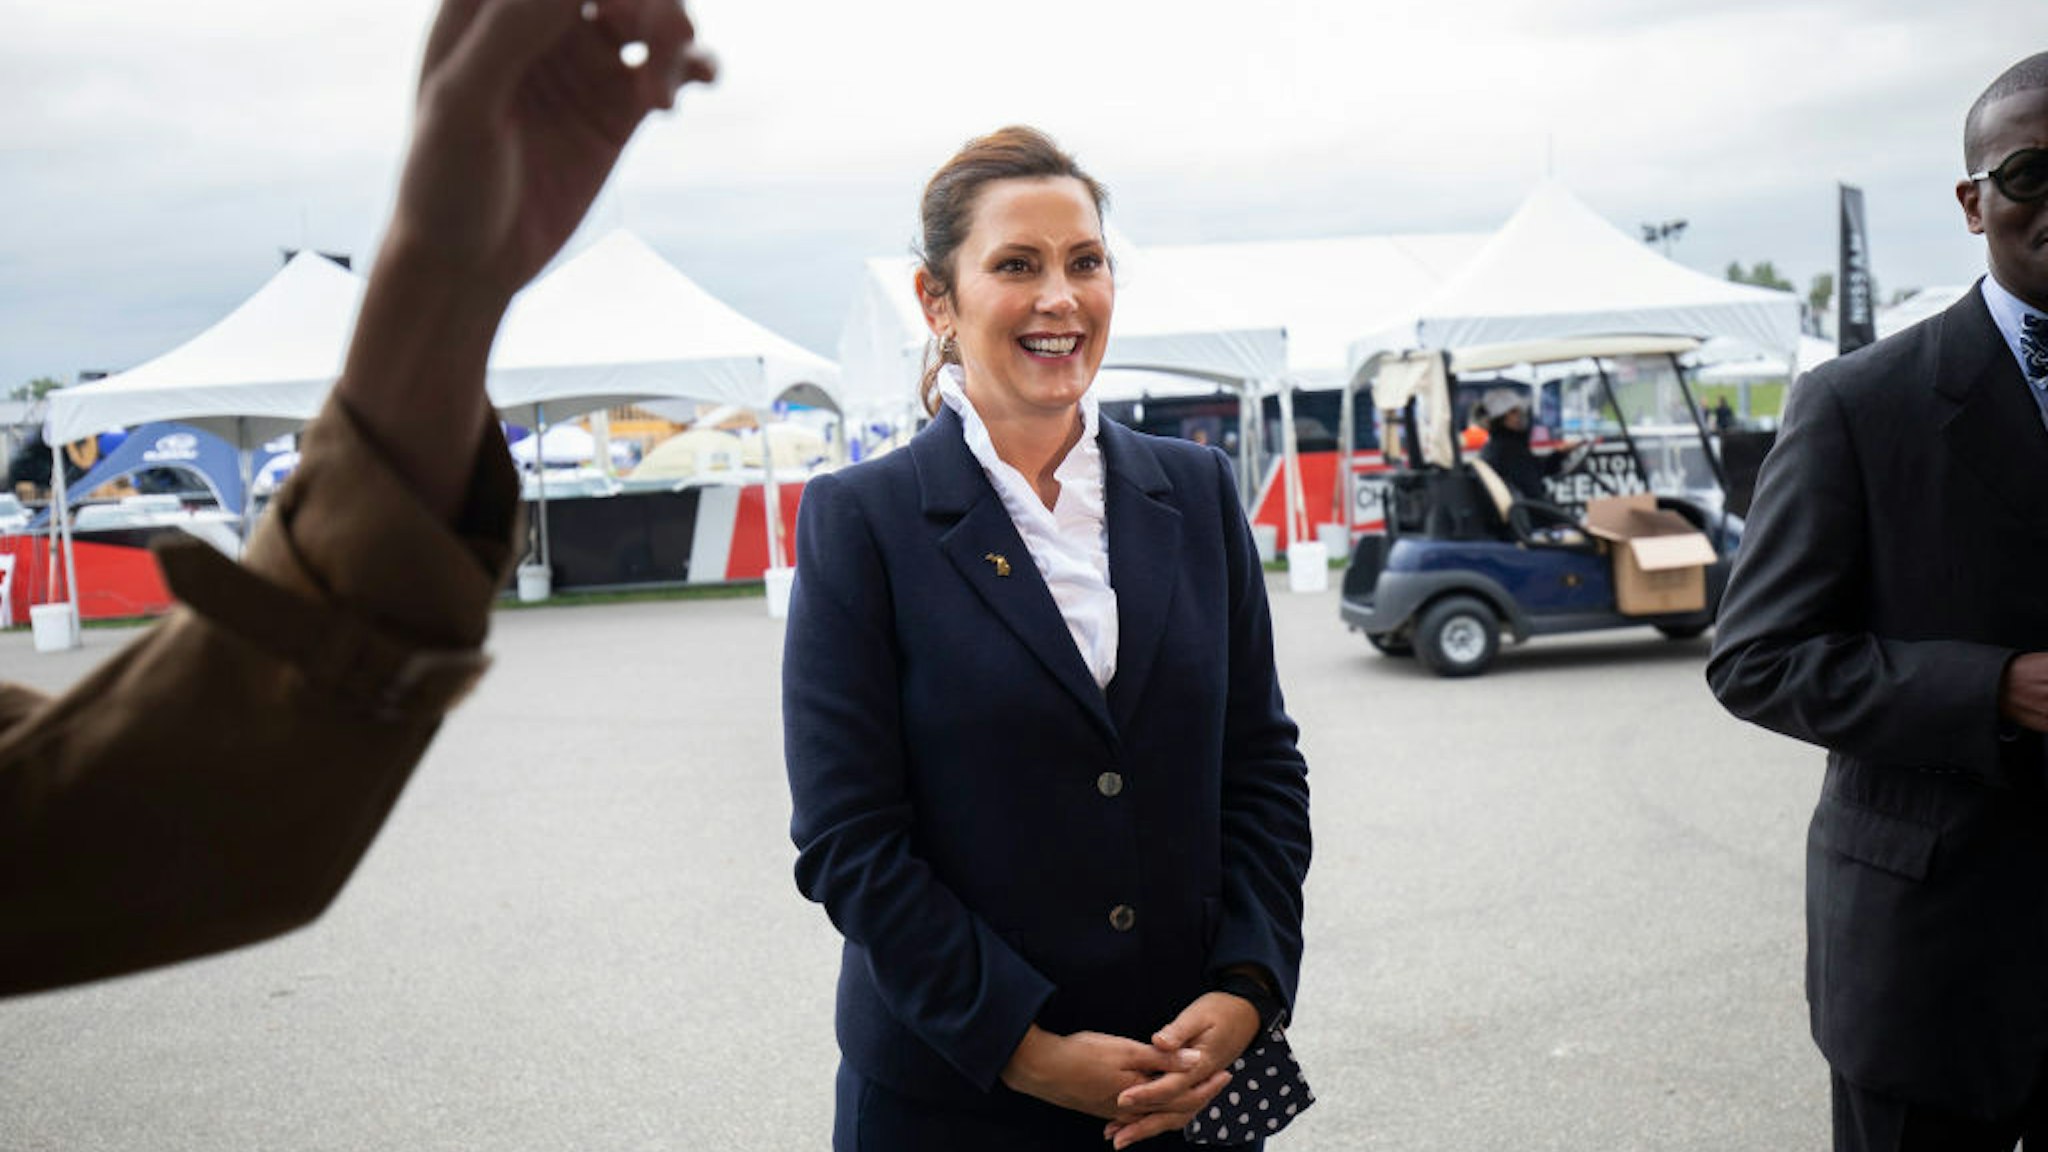 PONTIAC, MI - SEPTEMBER 21: Michigan Governor Gretchen Whitmer speaks with the news media at the 2021 Motor Bella auto show on September 21, 2021 in Pontiac, Michigan. The outdoor show runs from September 21 to September 26 and features over 350 cars, trucks, and utility vehicles on display, ride-along opportunities with professional drivers on a hot laps track, test drives, off-road track activations, and unique technology displays. (Photo by Bill Pugliano/Getty Images)